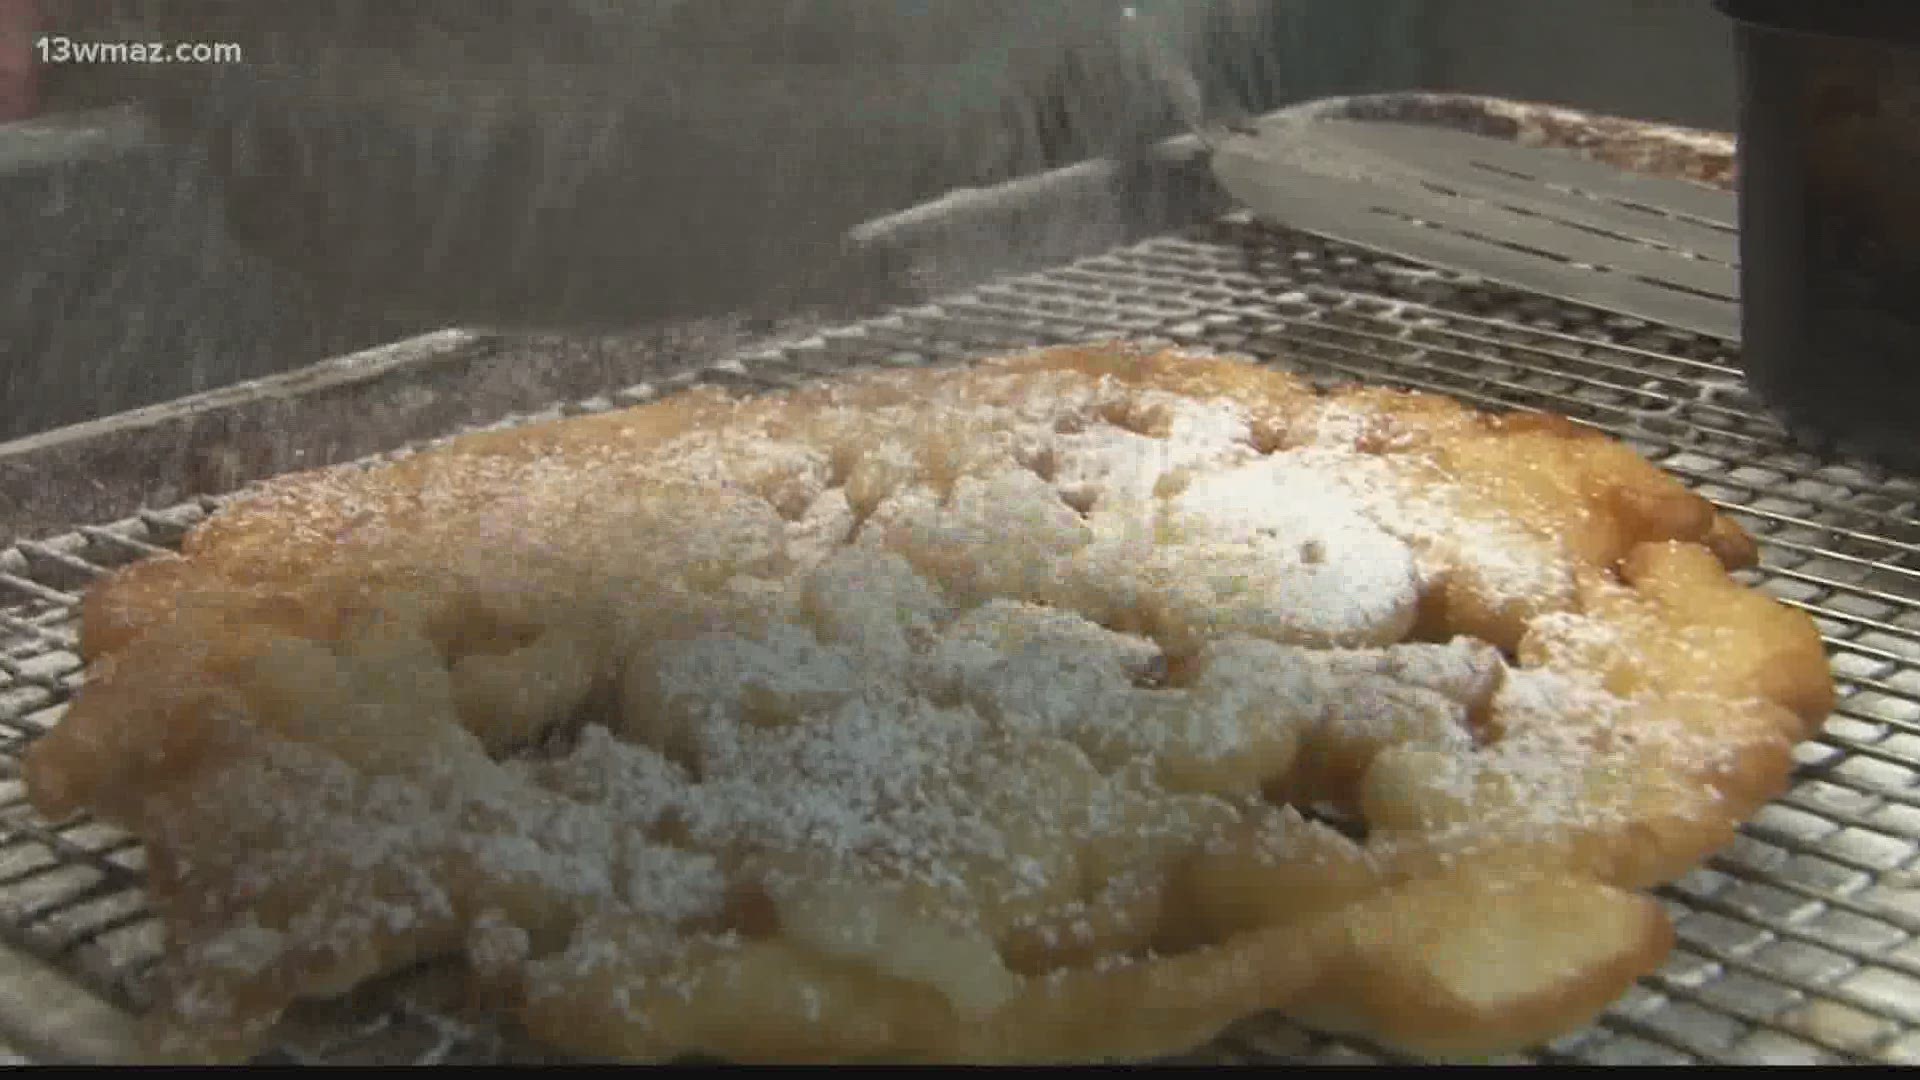 The Georgia National Fair won't happen this year, but you can still get your fair food fix at Lane Southern Orchards in Peach County.